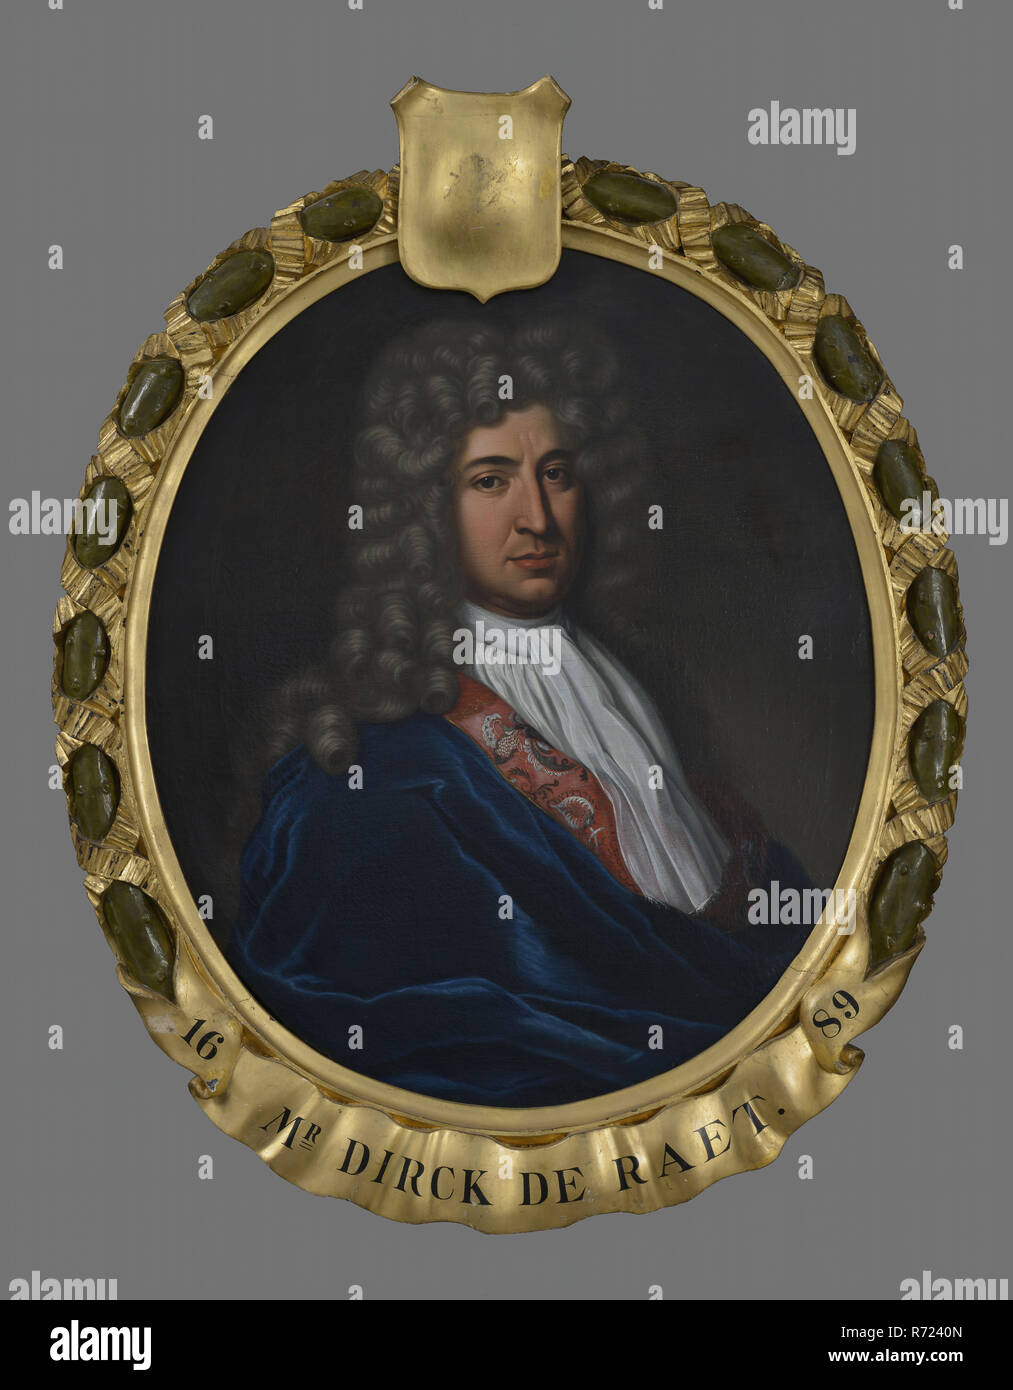 Jan de Meyer II, Portrait of Dirck de Raet or Raedt (1649-1706), portrait painting visual material linen oil painting canvas, Oval portrait of man representing Dirck de Raet or Raedt VOC governor Halfway face to face to the right. Gray allonge wig. White cravate blue drapery lapel with red motifs printed Front of canvas: right center: De Meijer 1722 (black paint) Dutch East India Company VOC Rotterdam City Triangle Boompjes governor Raet This portrait originally hung in the Oost-Indischhuis at the Boompjes in Rotterdam. Stock Photo